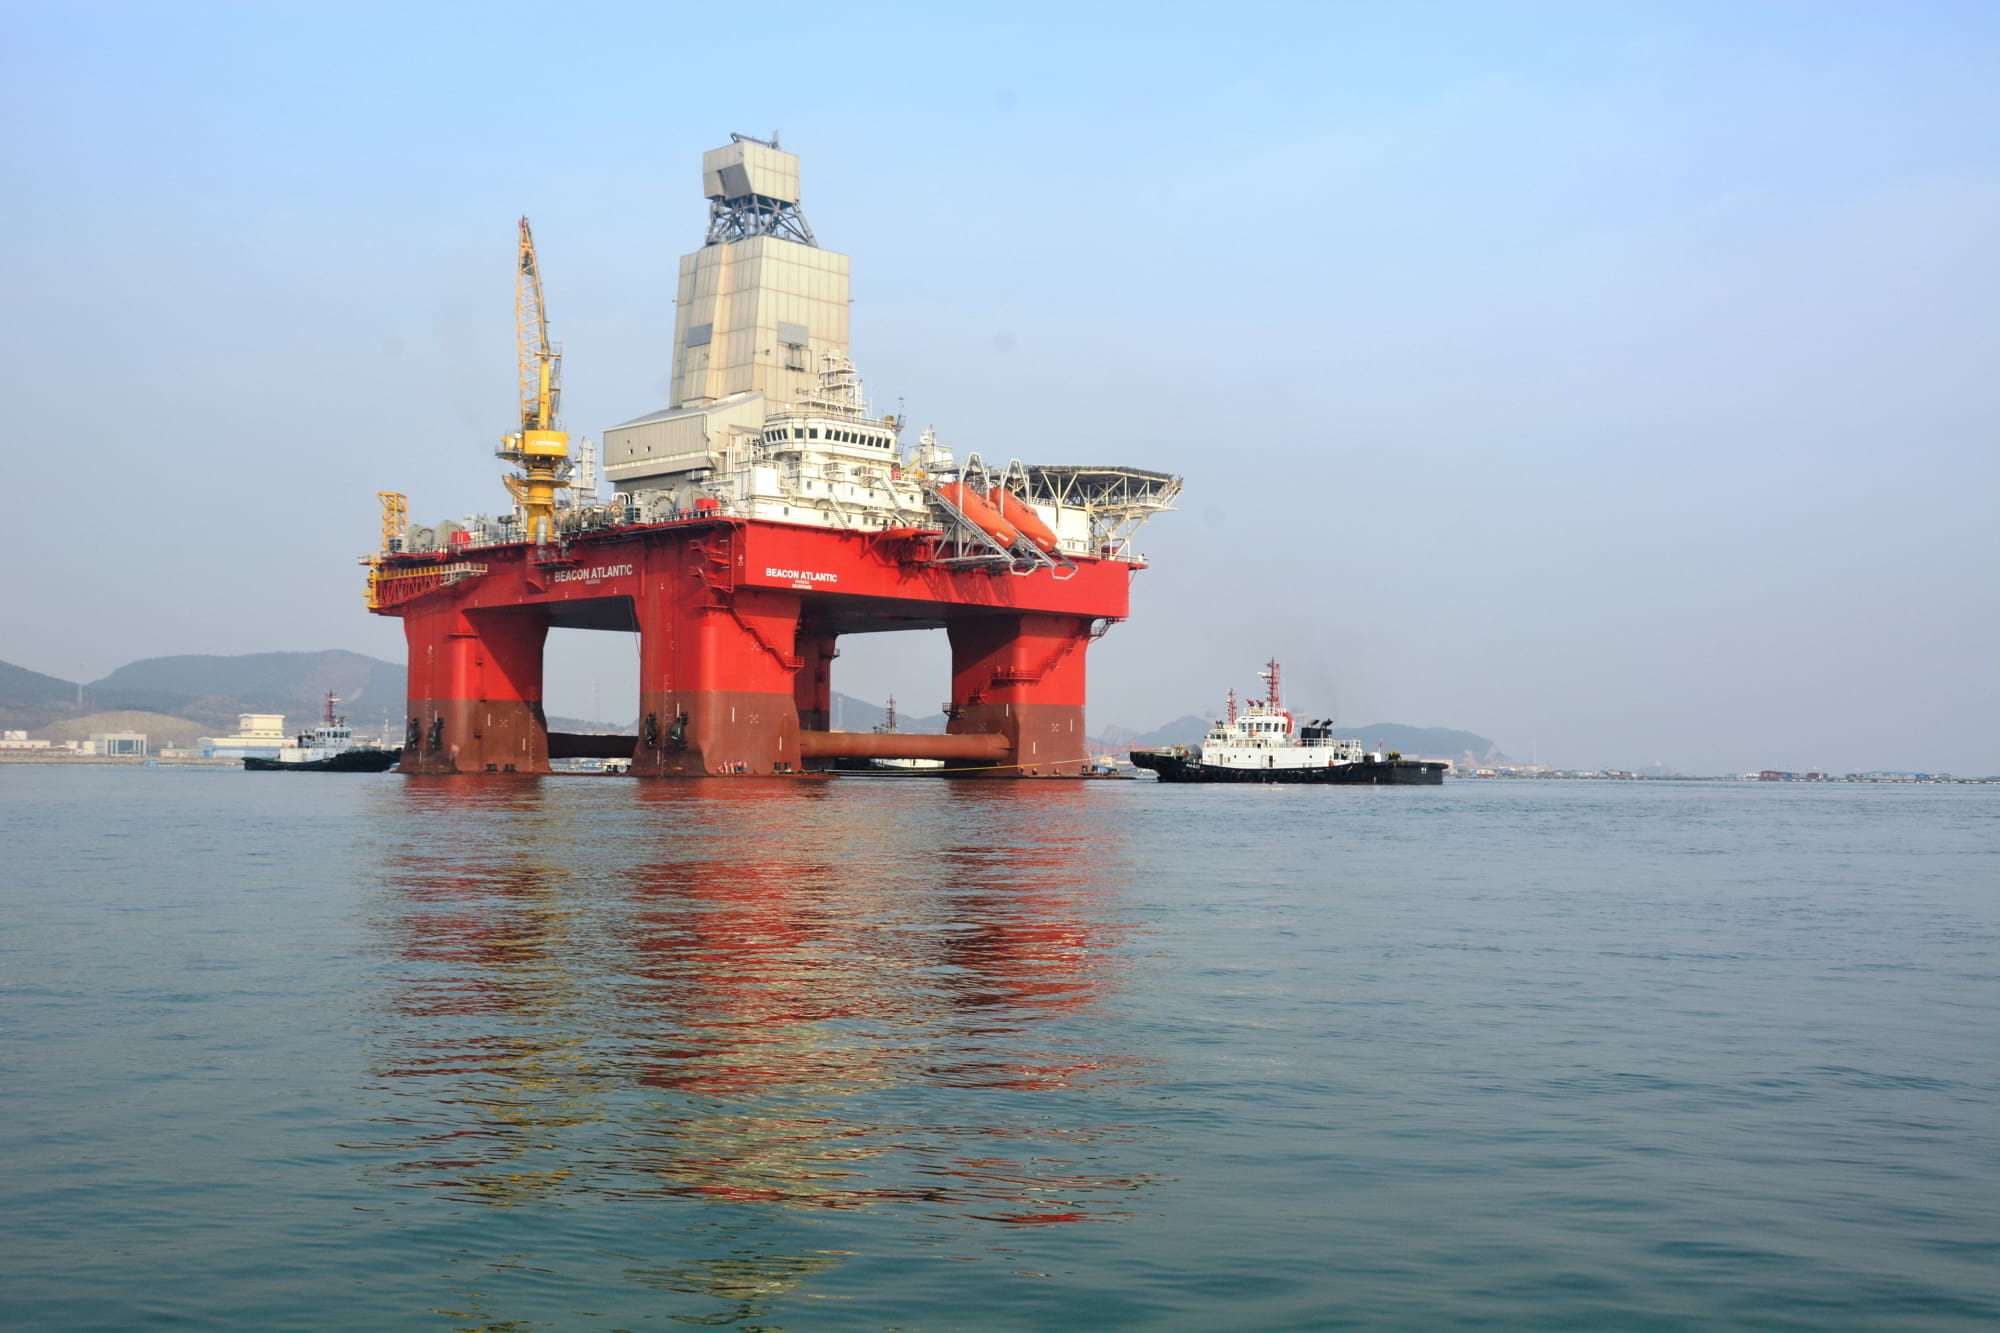 Polish player all set to drill Norwegian Sea wildcat with Odfjell rig